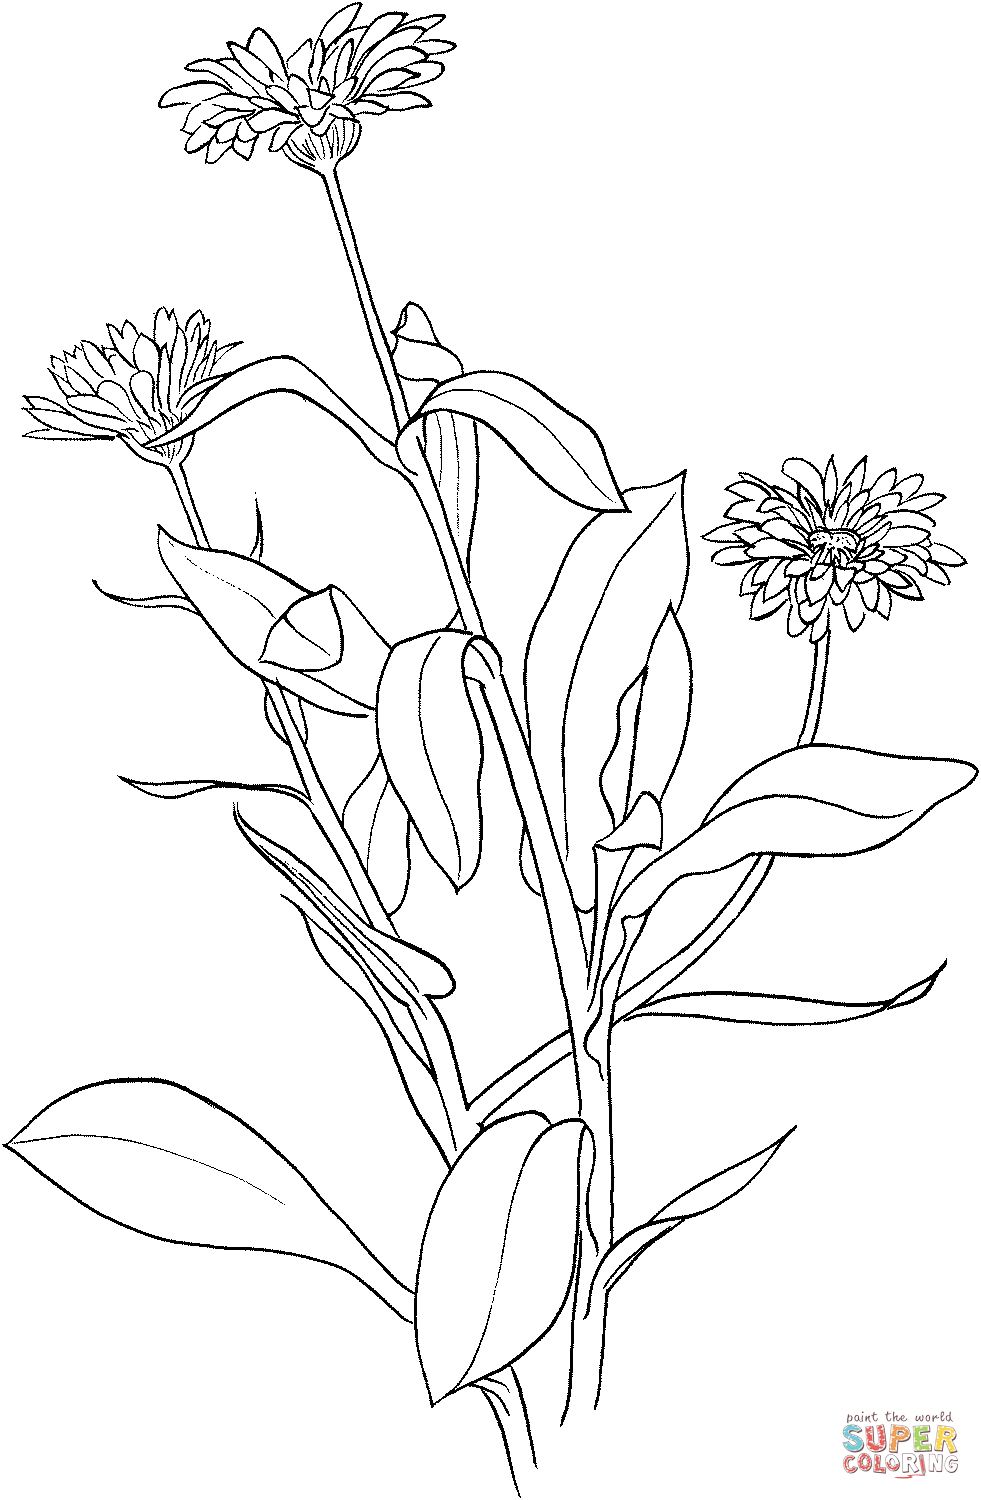 Marigold coloring page | Free Printable Coloring Pages